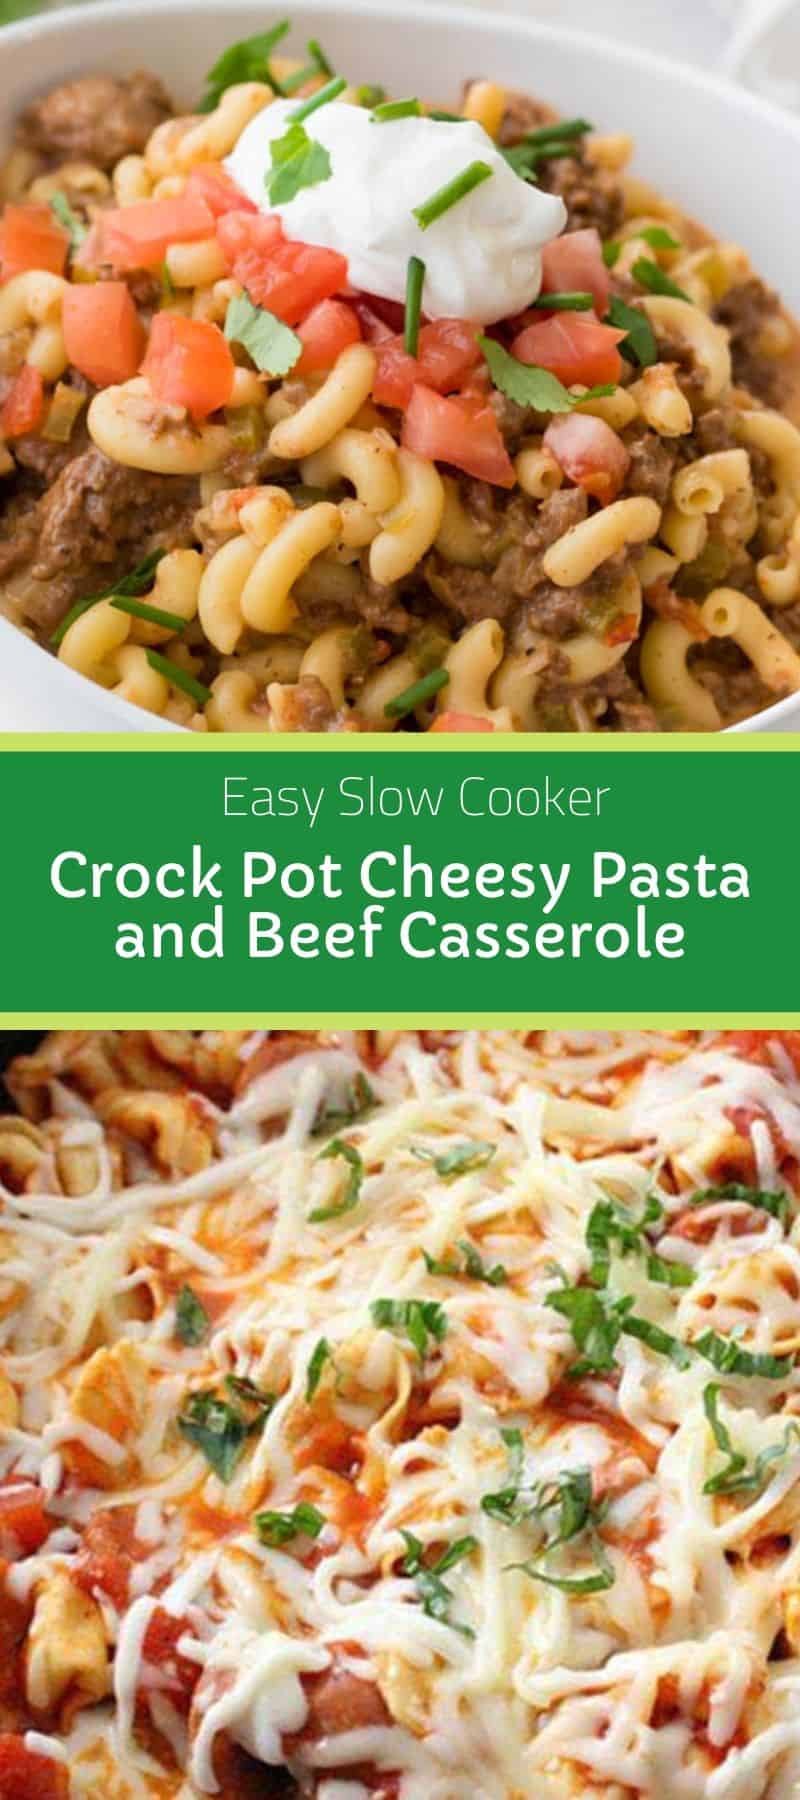 Easy Slow Cooker Crock Pot Cheesy Pasta and Beef Casserole 3